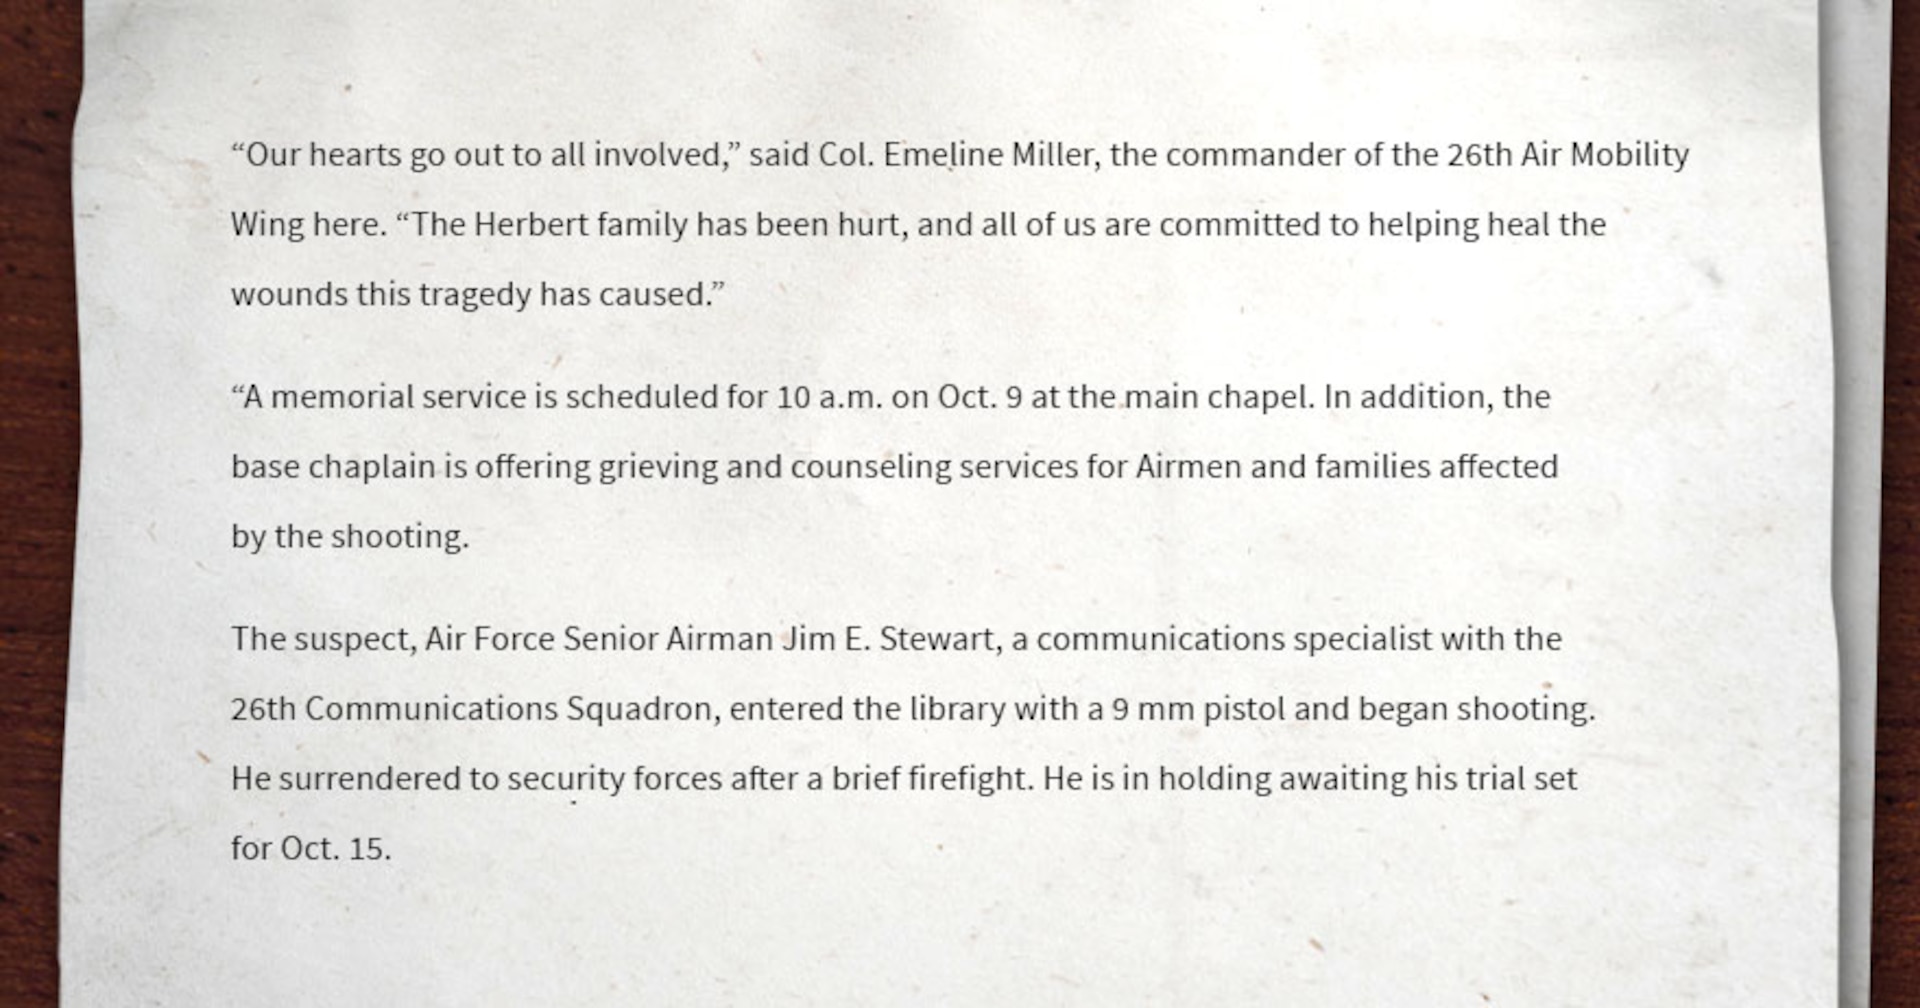 Image of miscellaneous text that provides a quote from the commander, the day and time of the memorial service and information on the suspect.